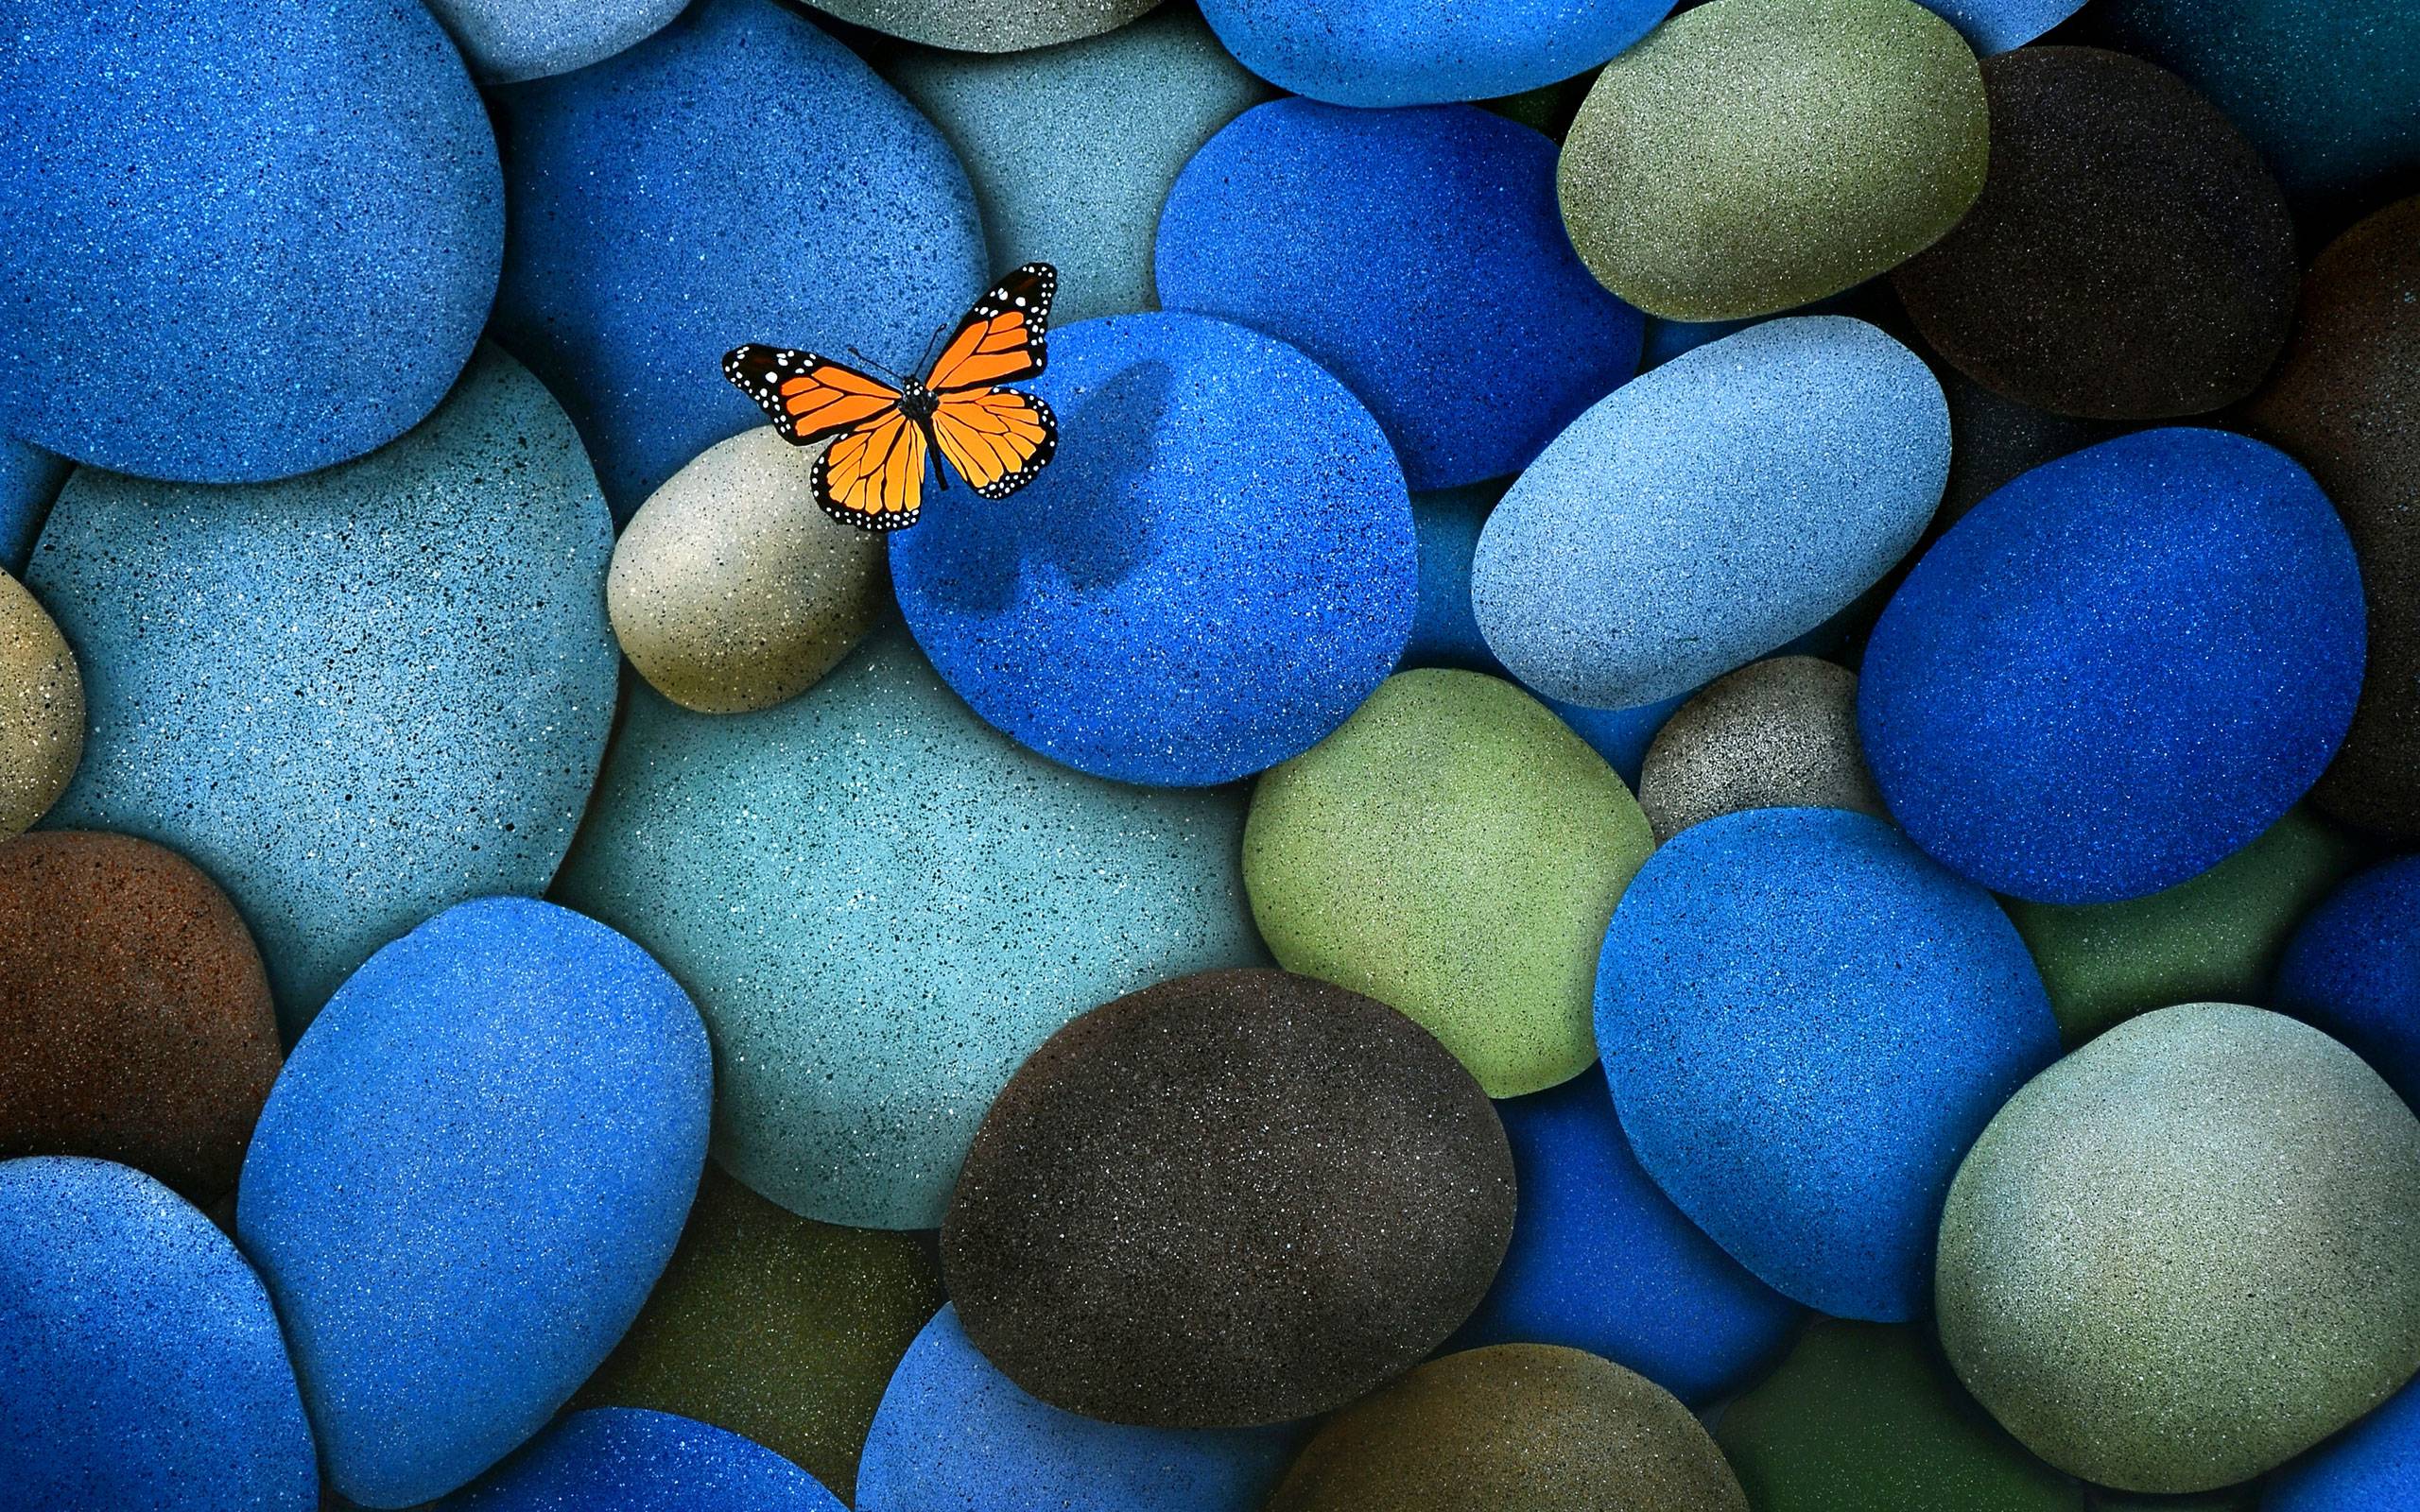 Wallpaper For > Real Blue Butterfly Wallpaper